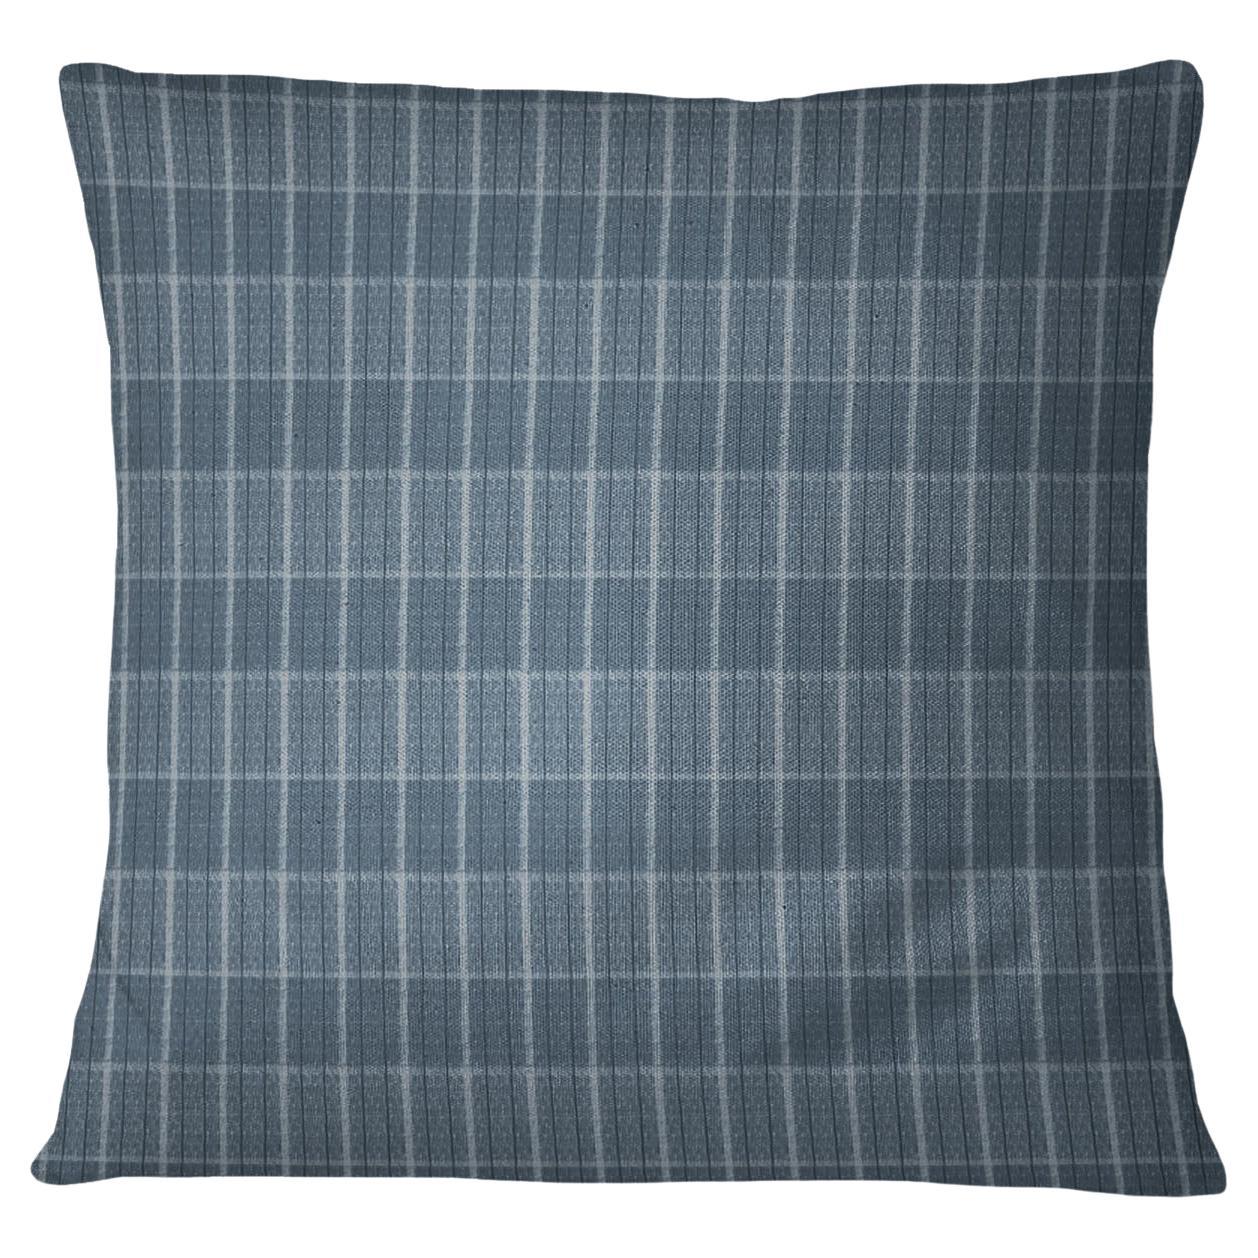 Checkmate Polyester Throw Pillows Set of 2 in Color Denim